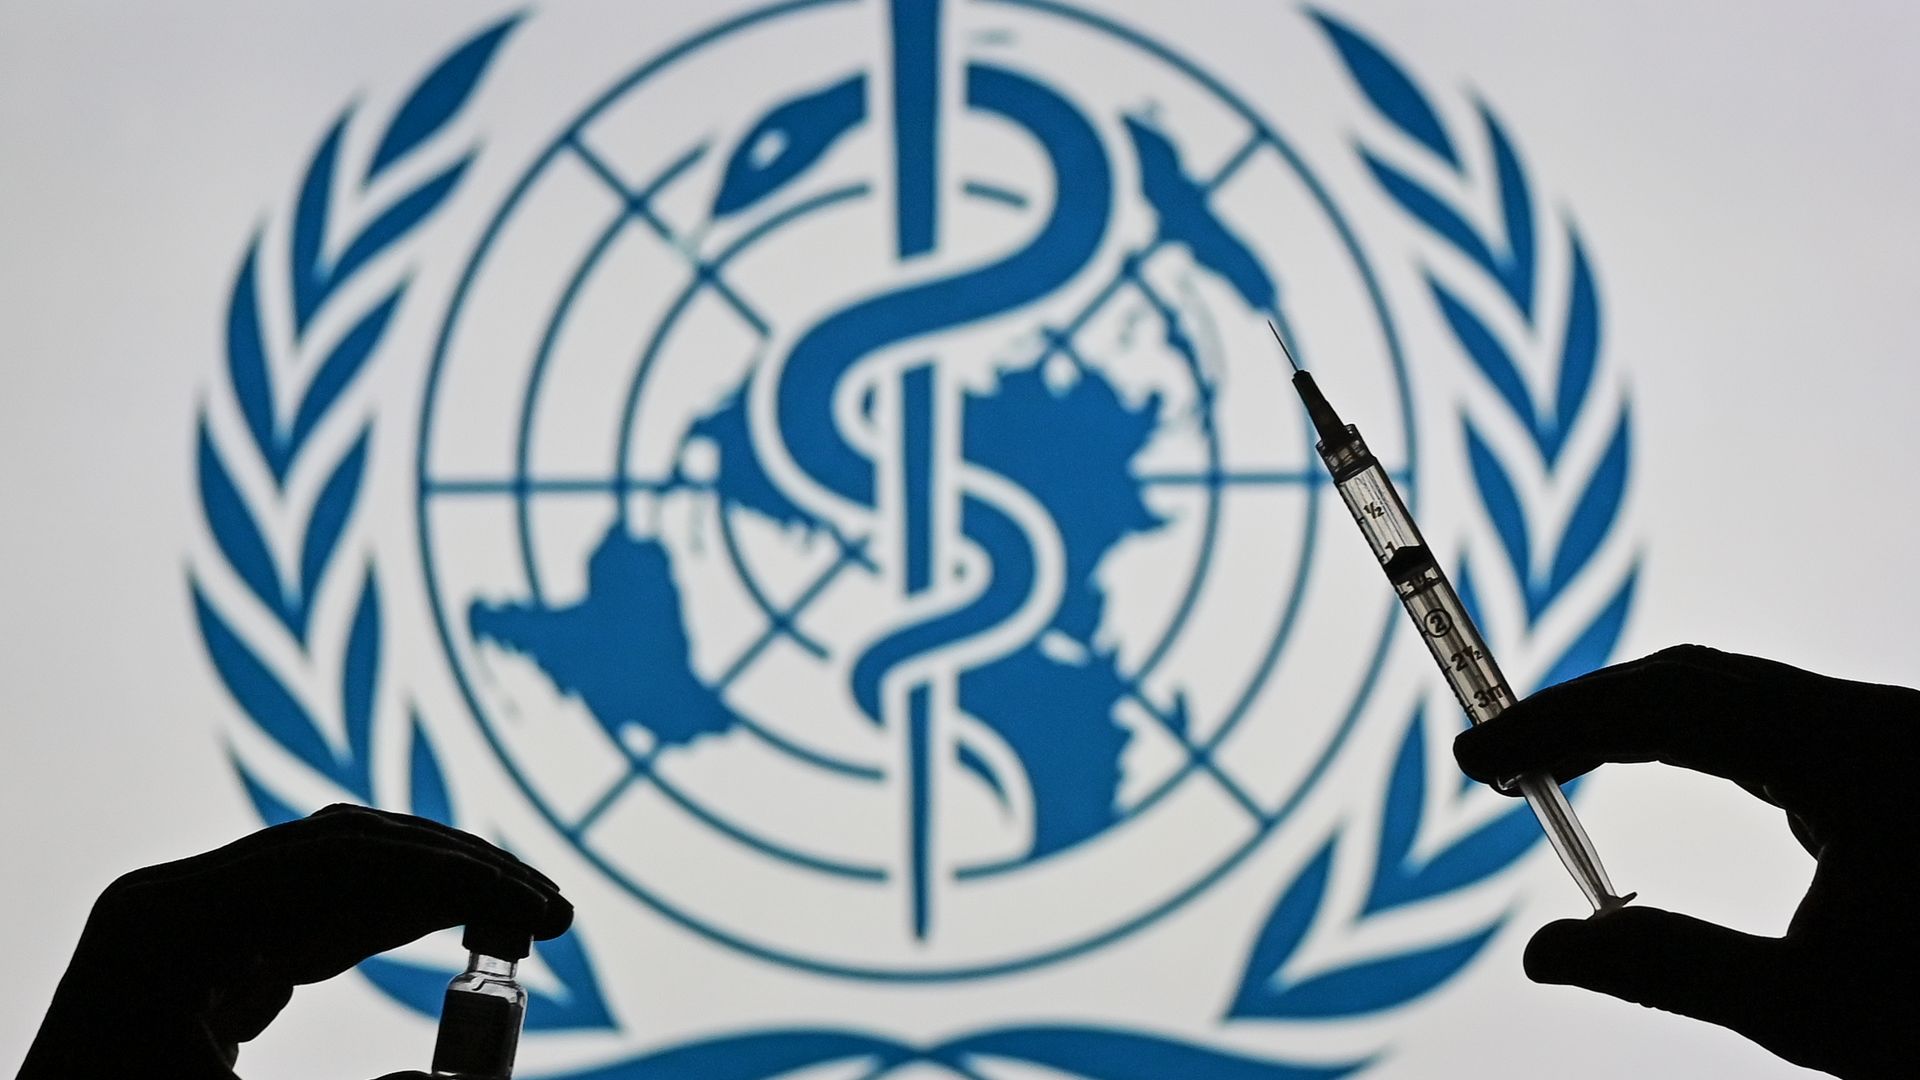 WHO logo with a person holding a medical syringe and a vaccine vial.